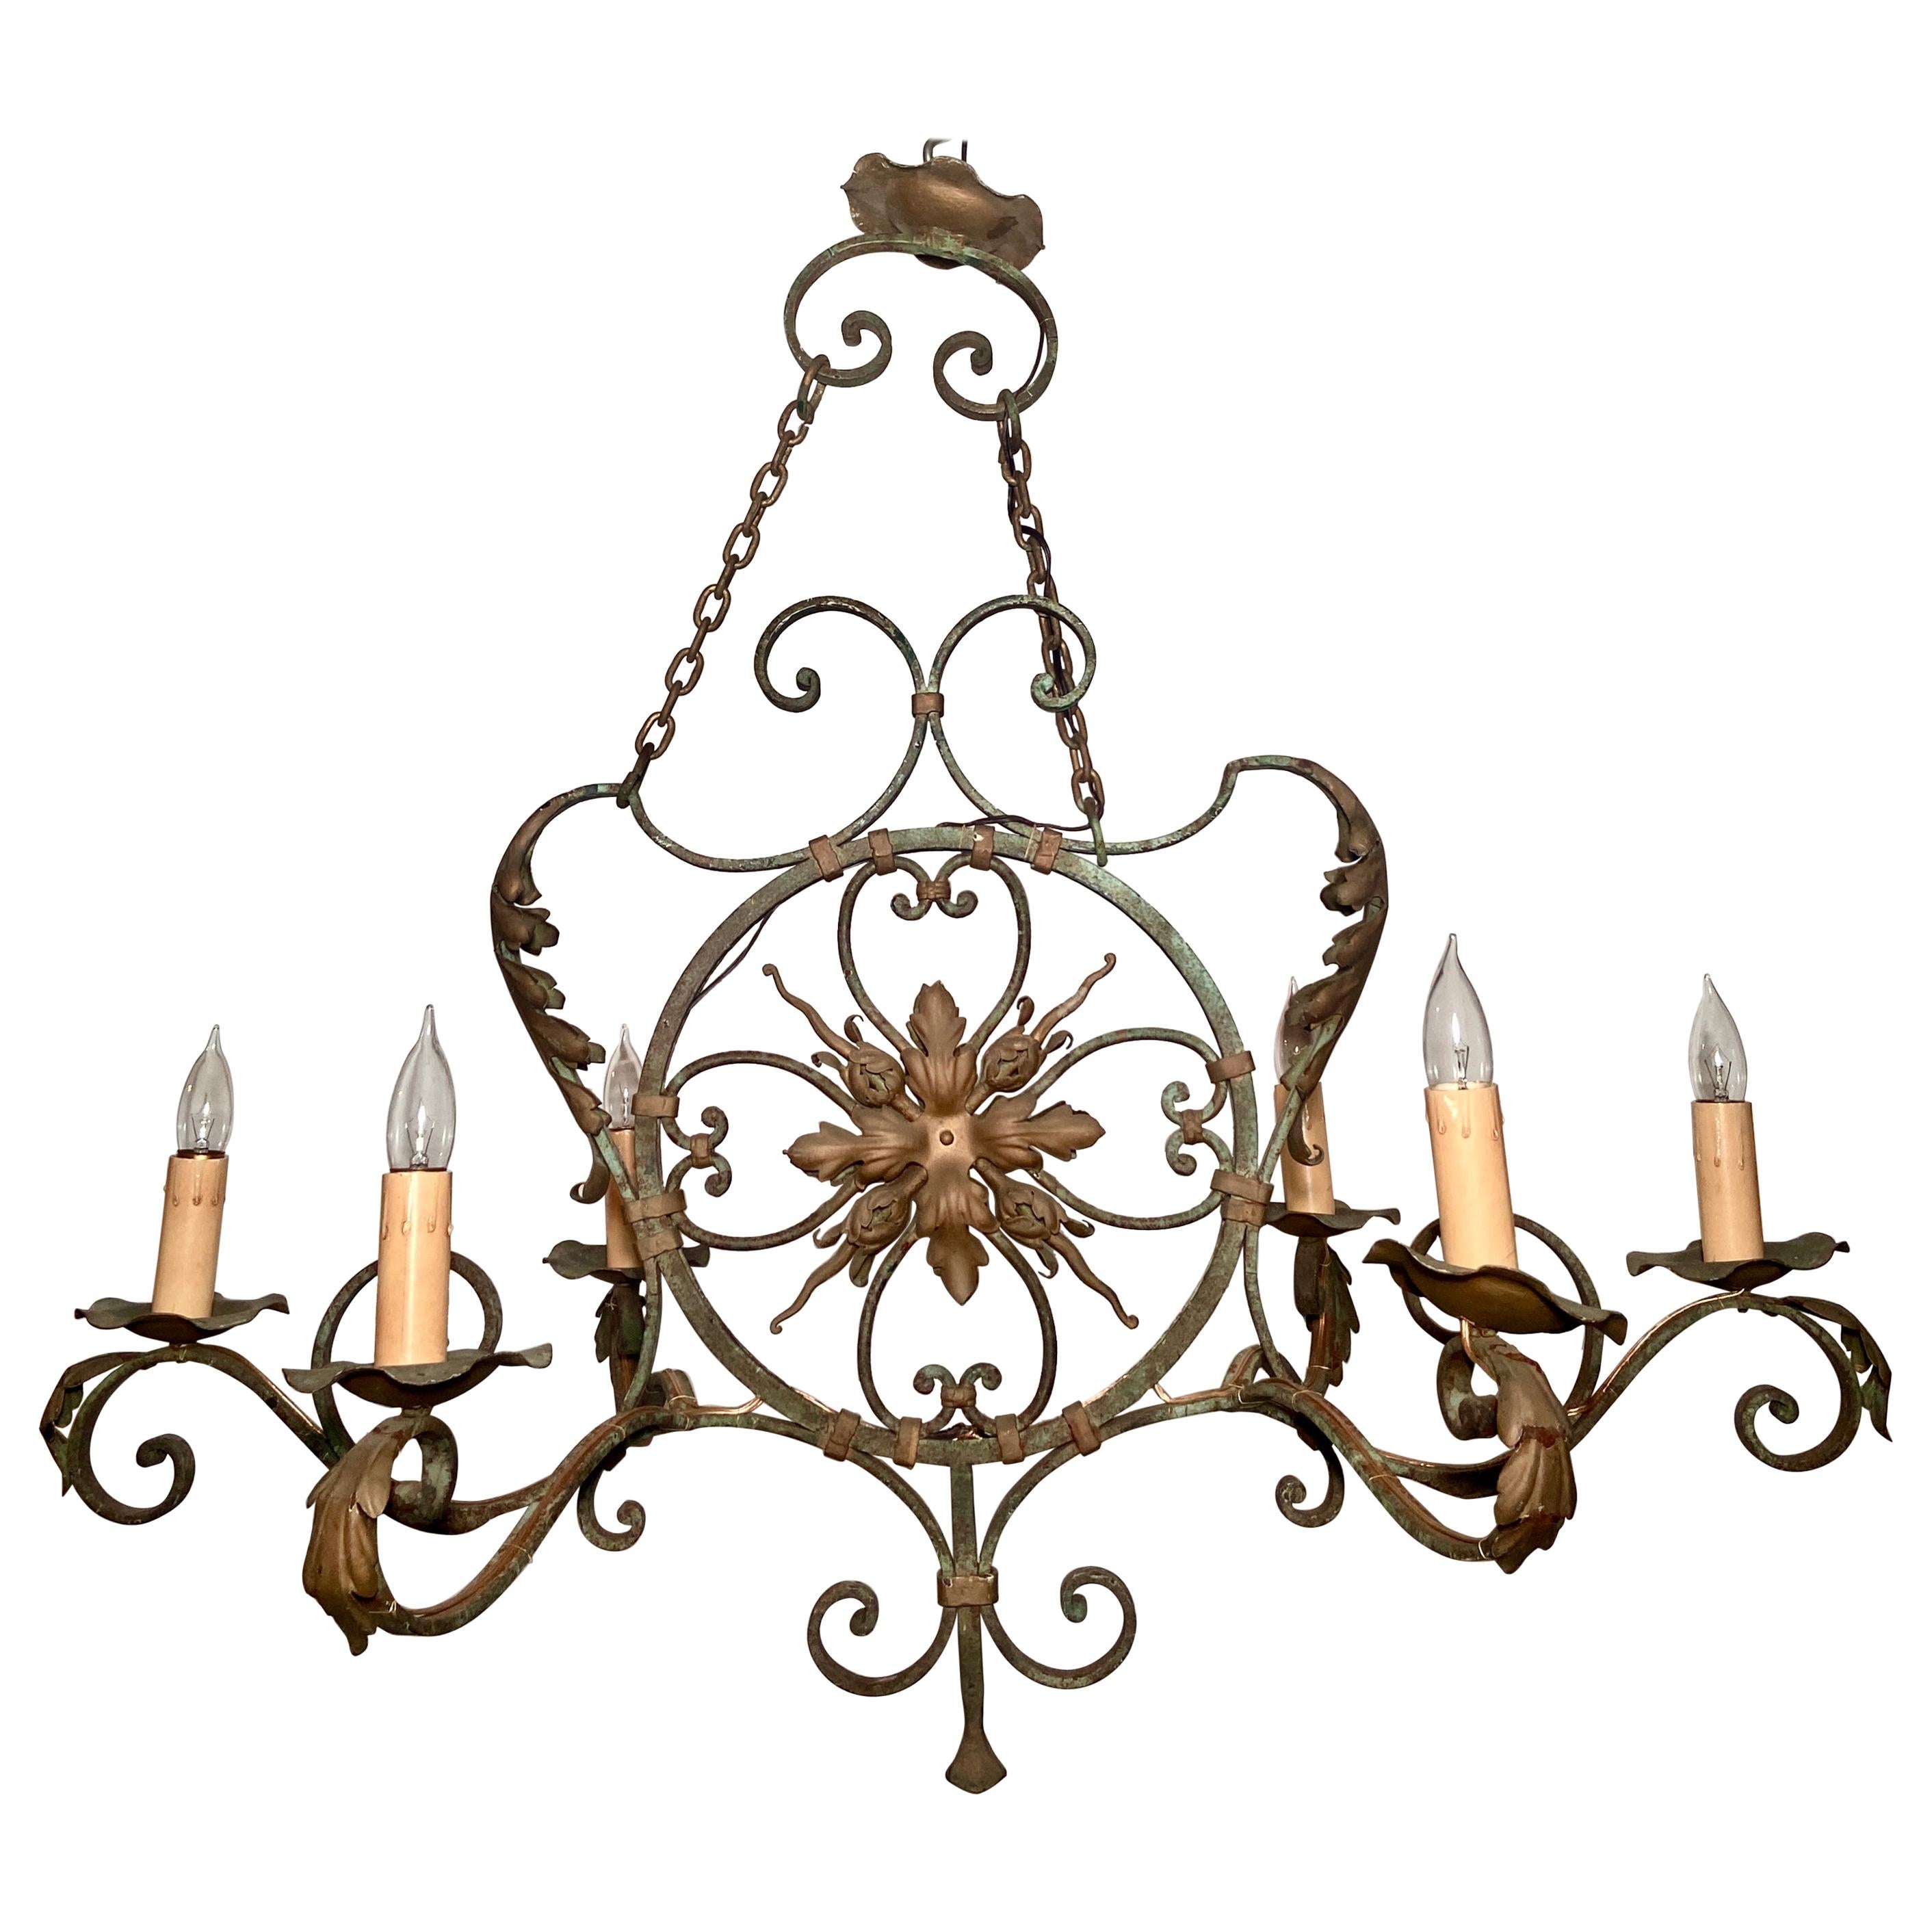 Antique 19th Century French Wrought Iron 6 Light Chandelier